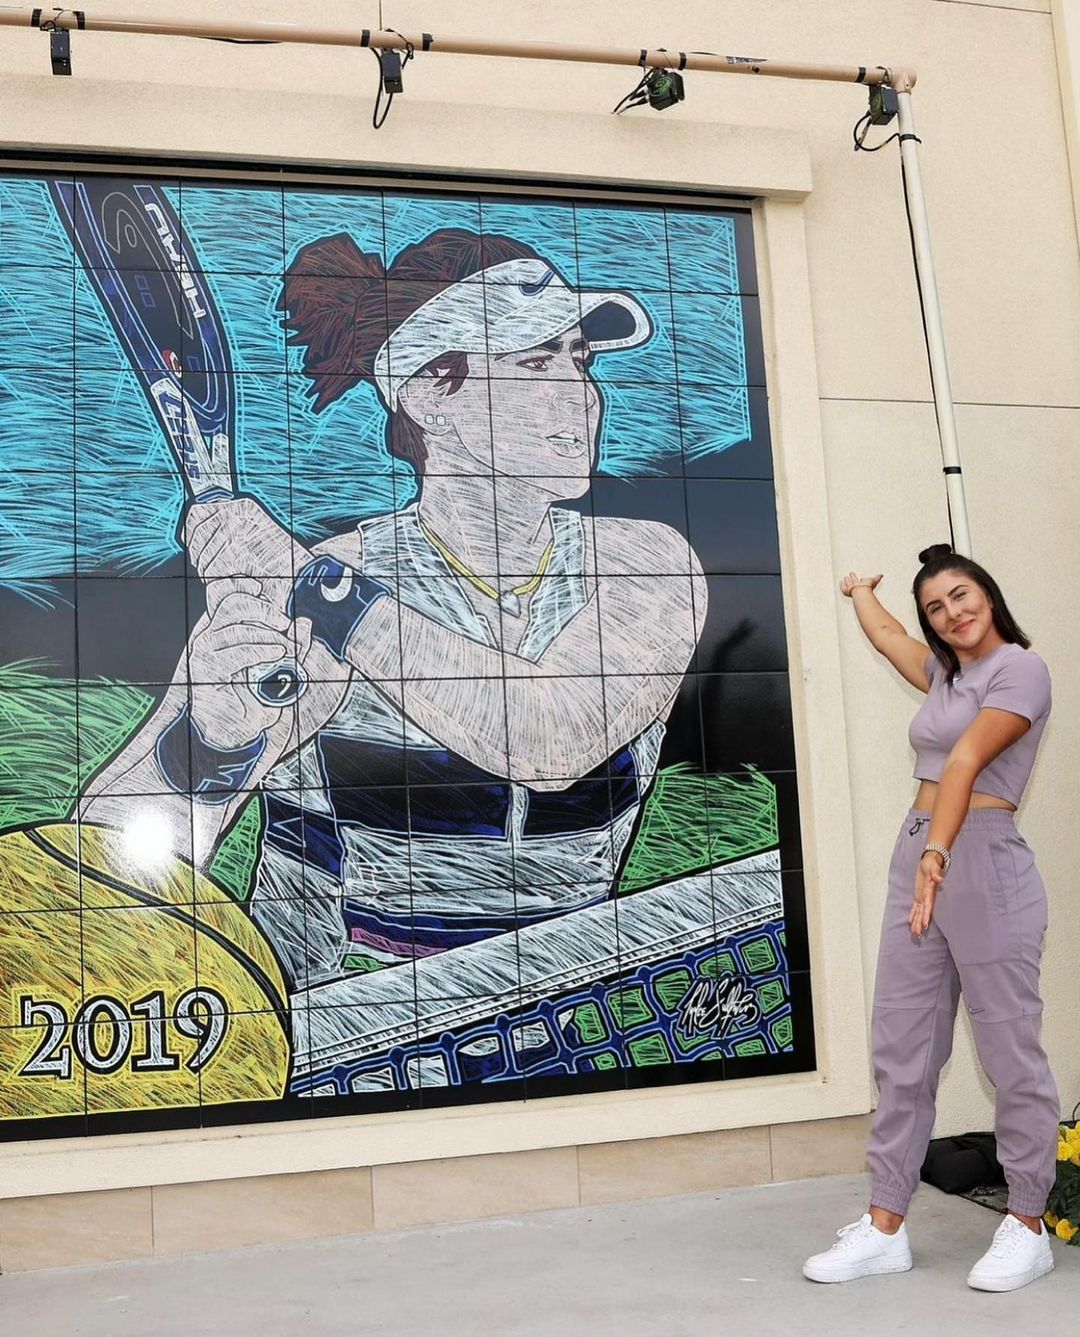 Bianca Andreescu unveils Indian Wells mural ahead of title defense